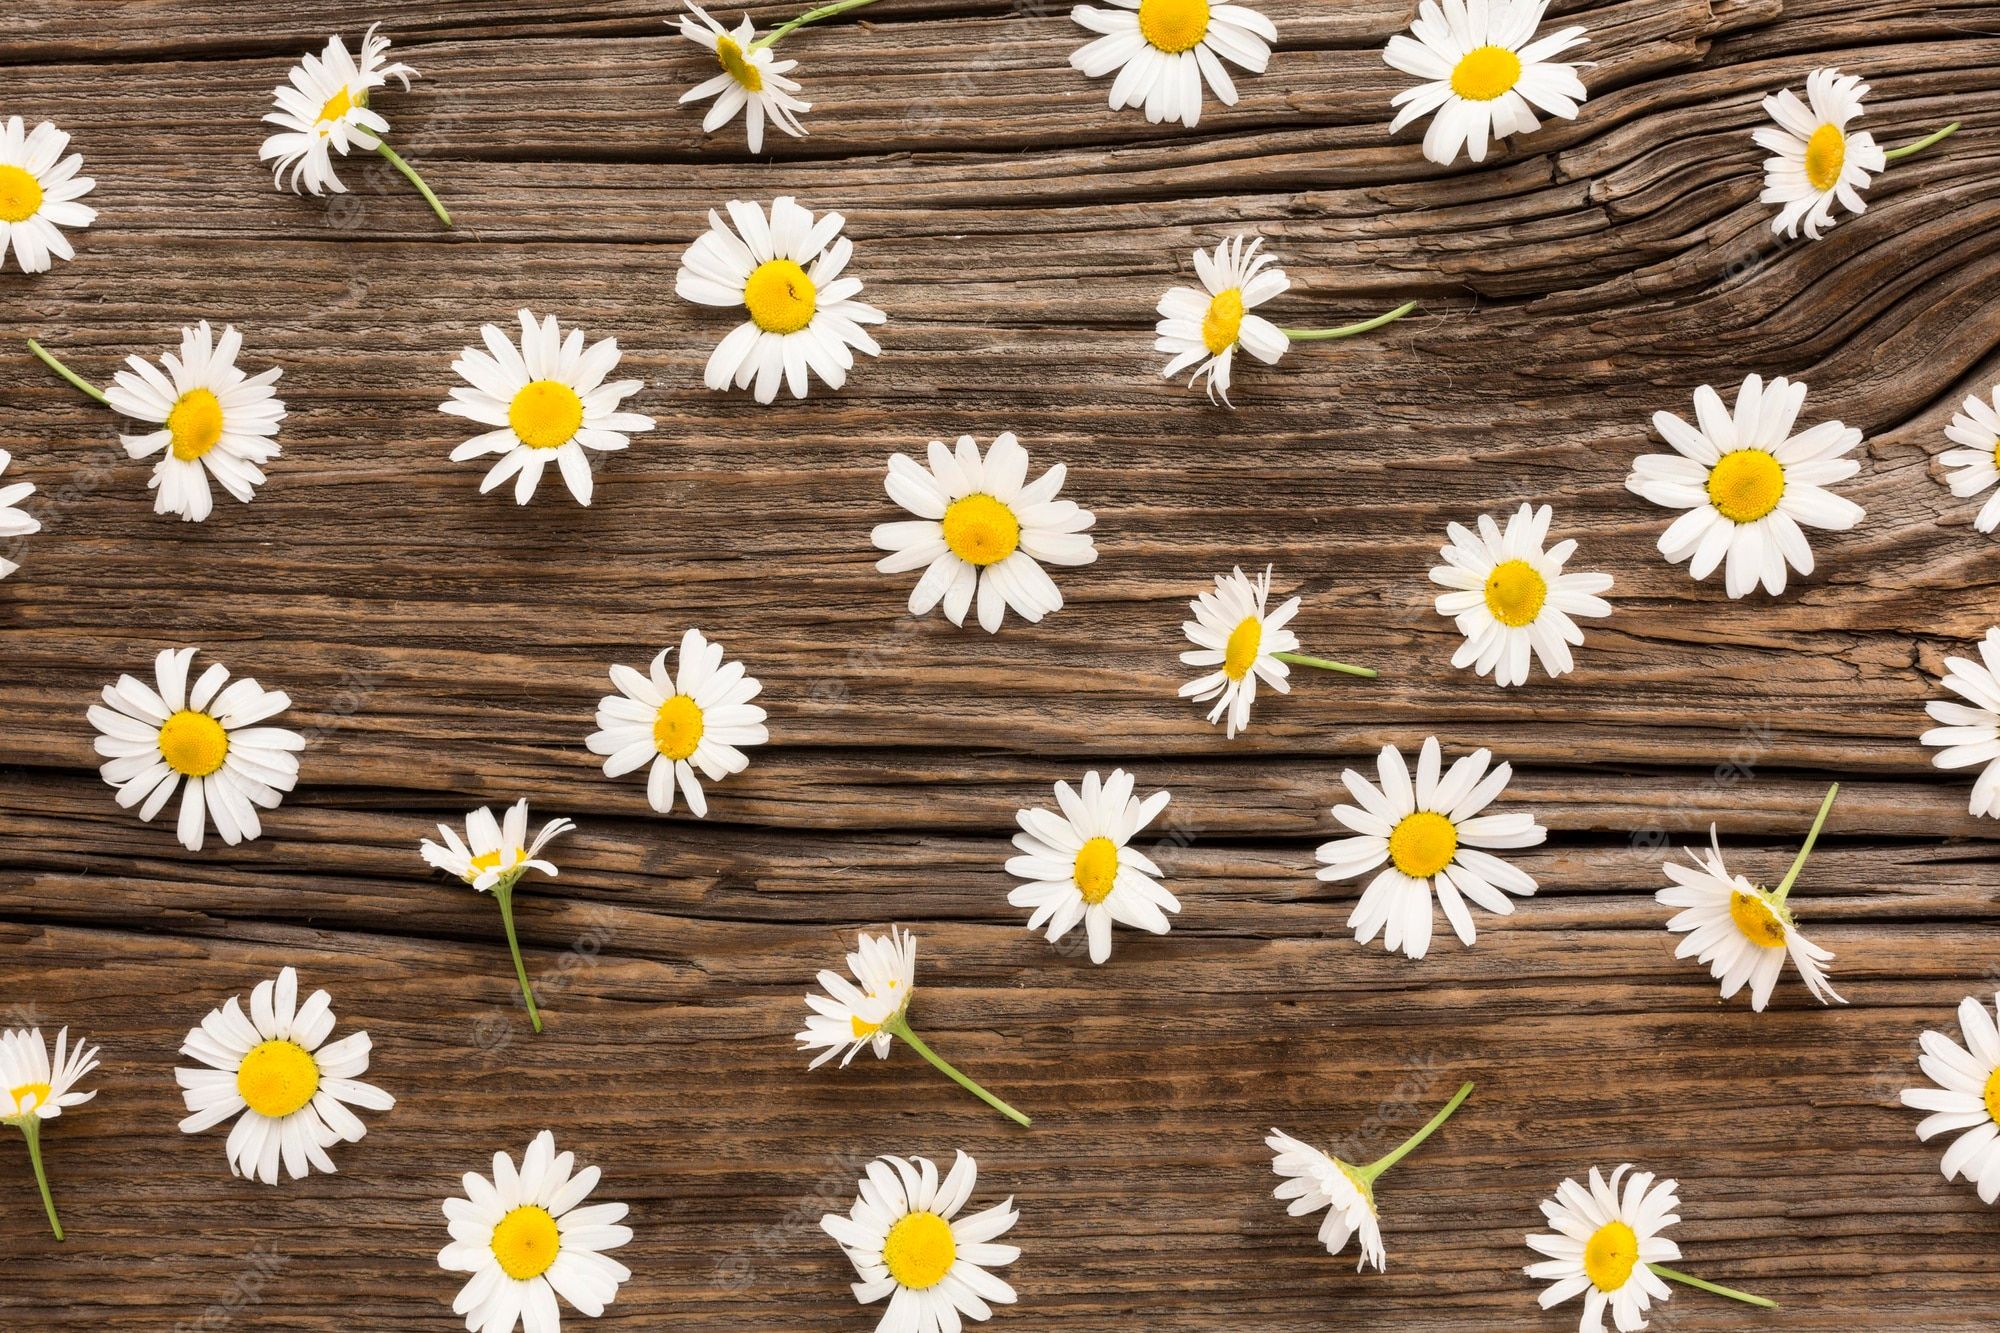 Daisy flowers on a wooden background - Daisy